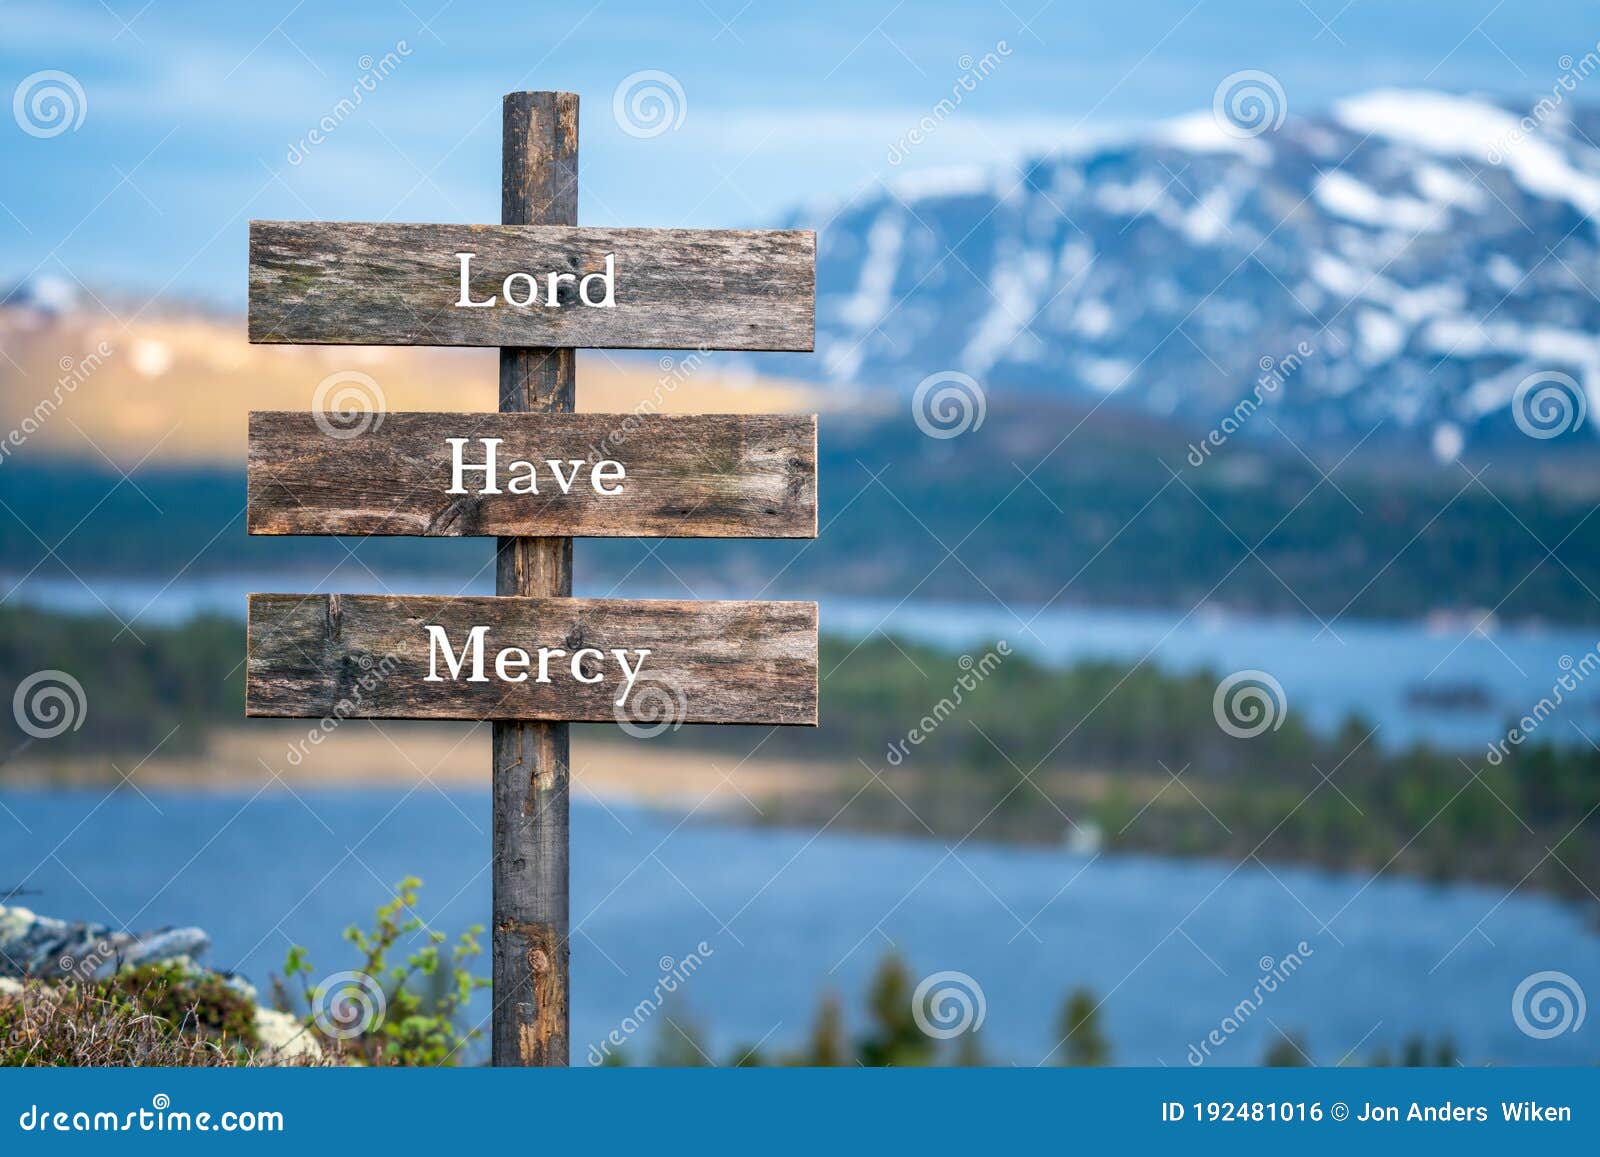 lord have mercy text on wooden signpost outdoors in landscape scenery during blue hour.